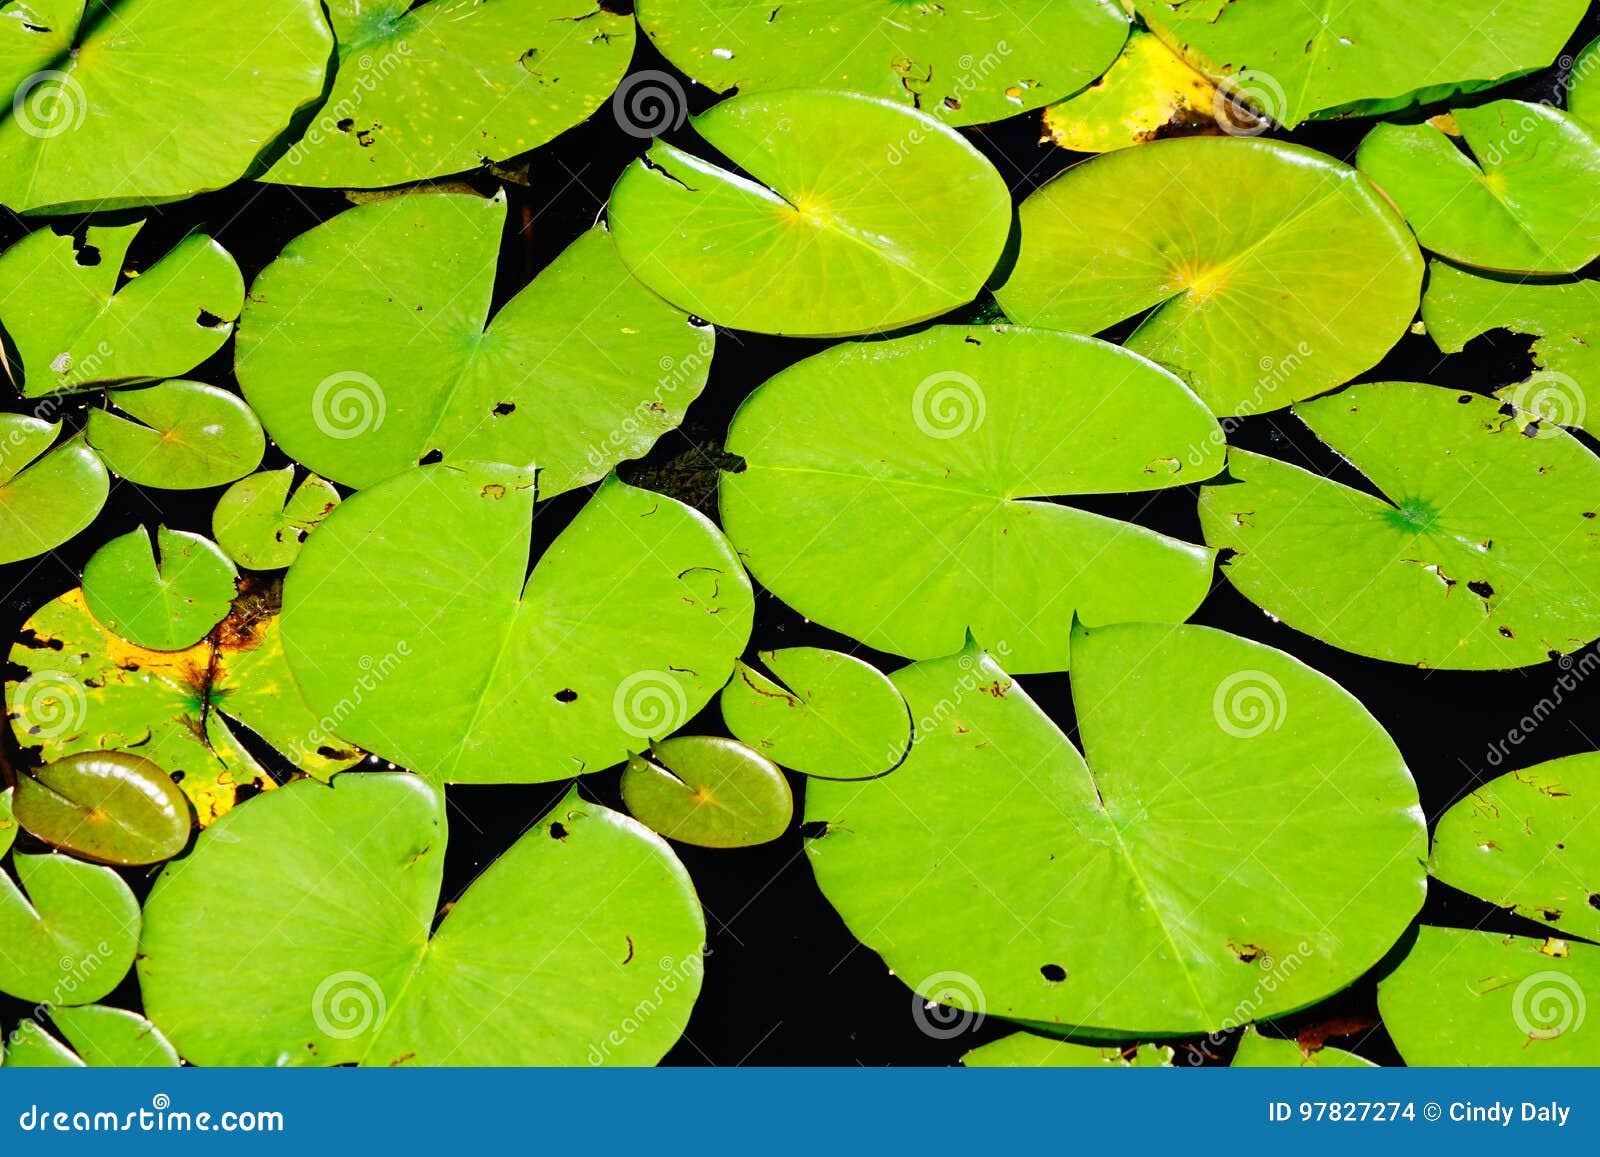 Large lilly pads on a lake stock photo. Image of large - 97827274